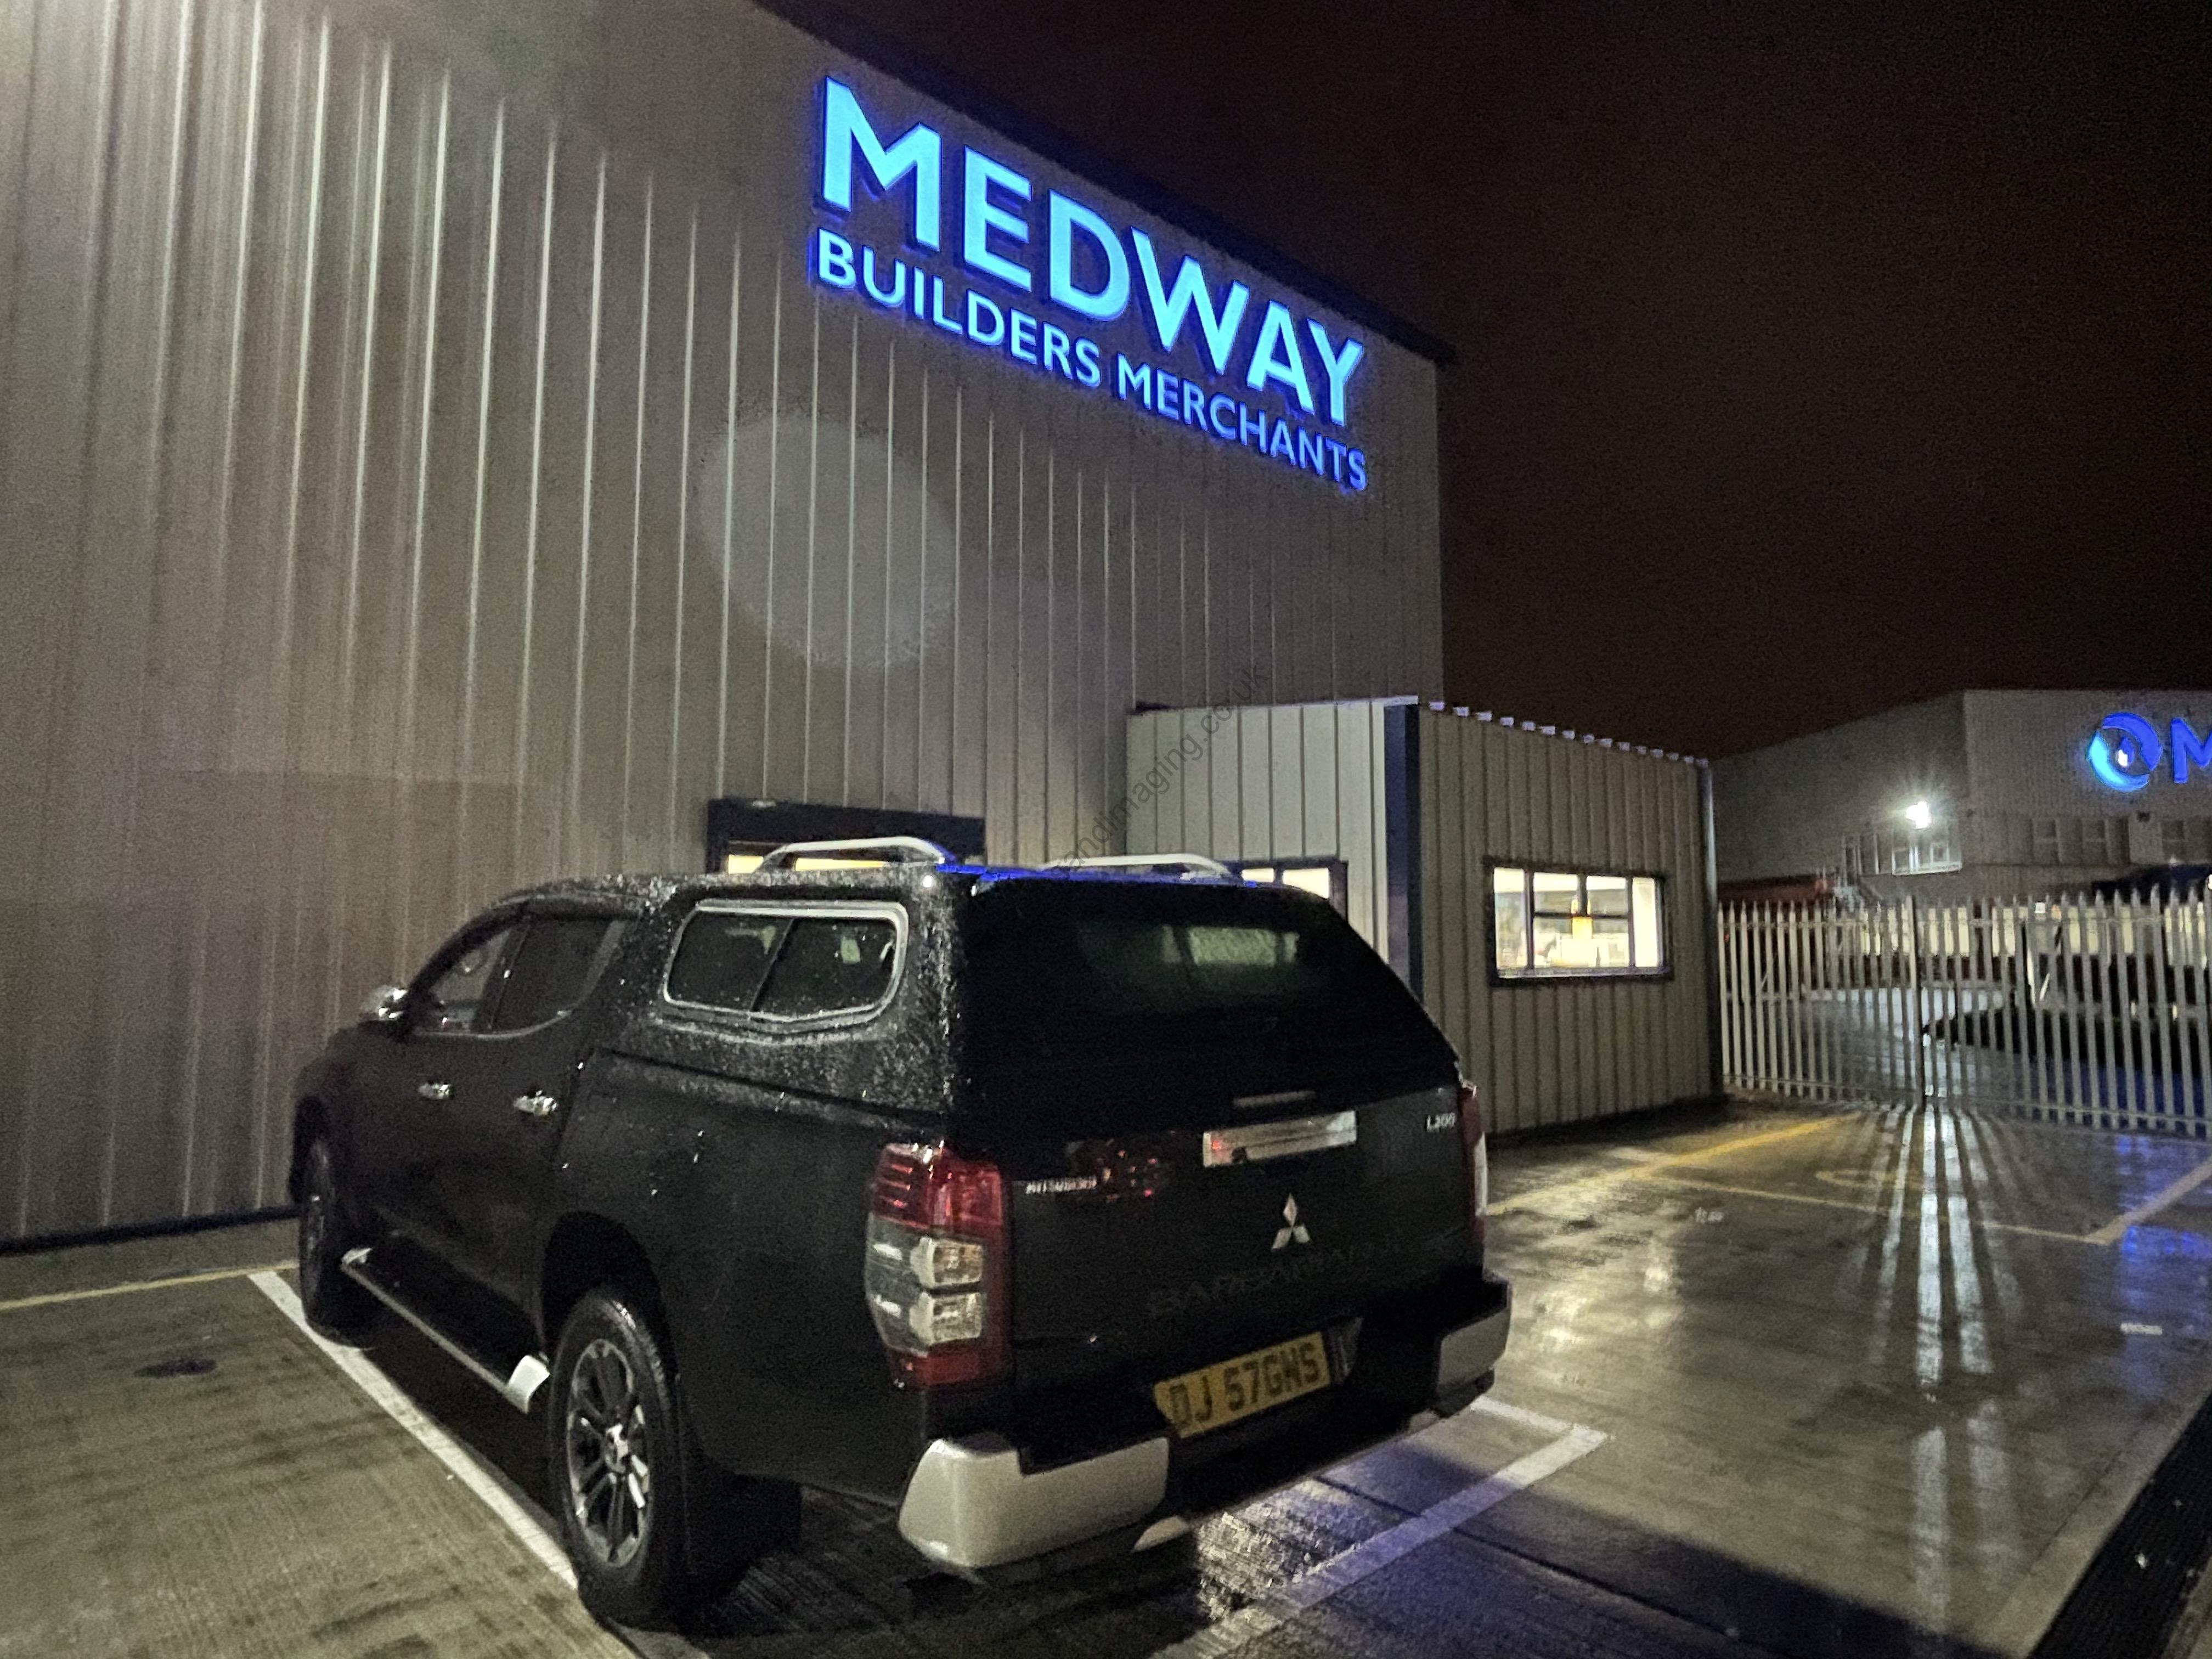 Medway Builders illuminated 3D signage (1)